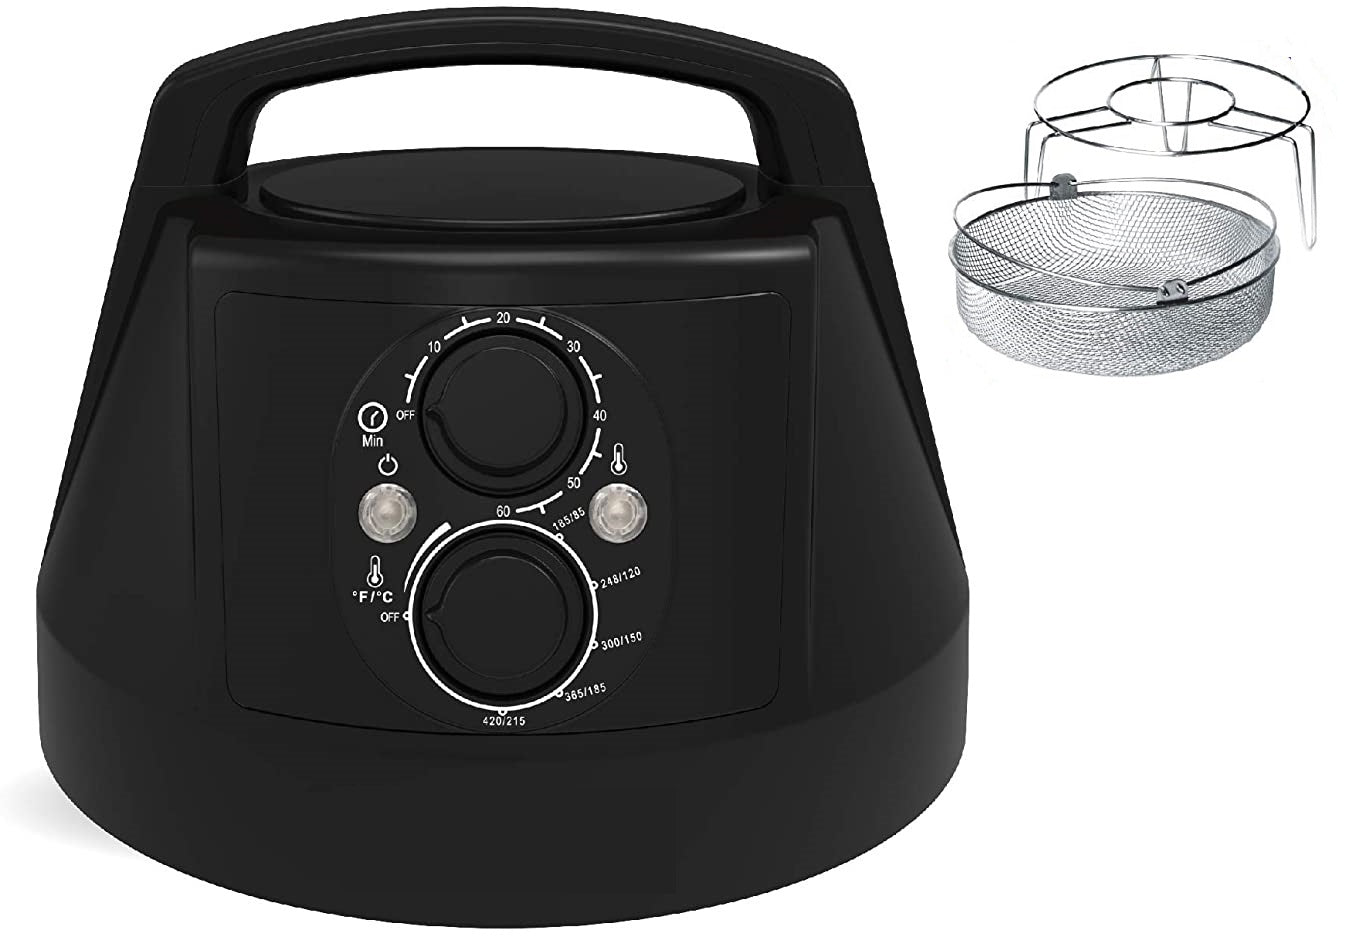 This Cool Pressure Cooker Lid Turns Your Instant Pot Into An Air Fryer